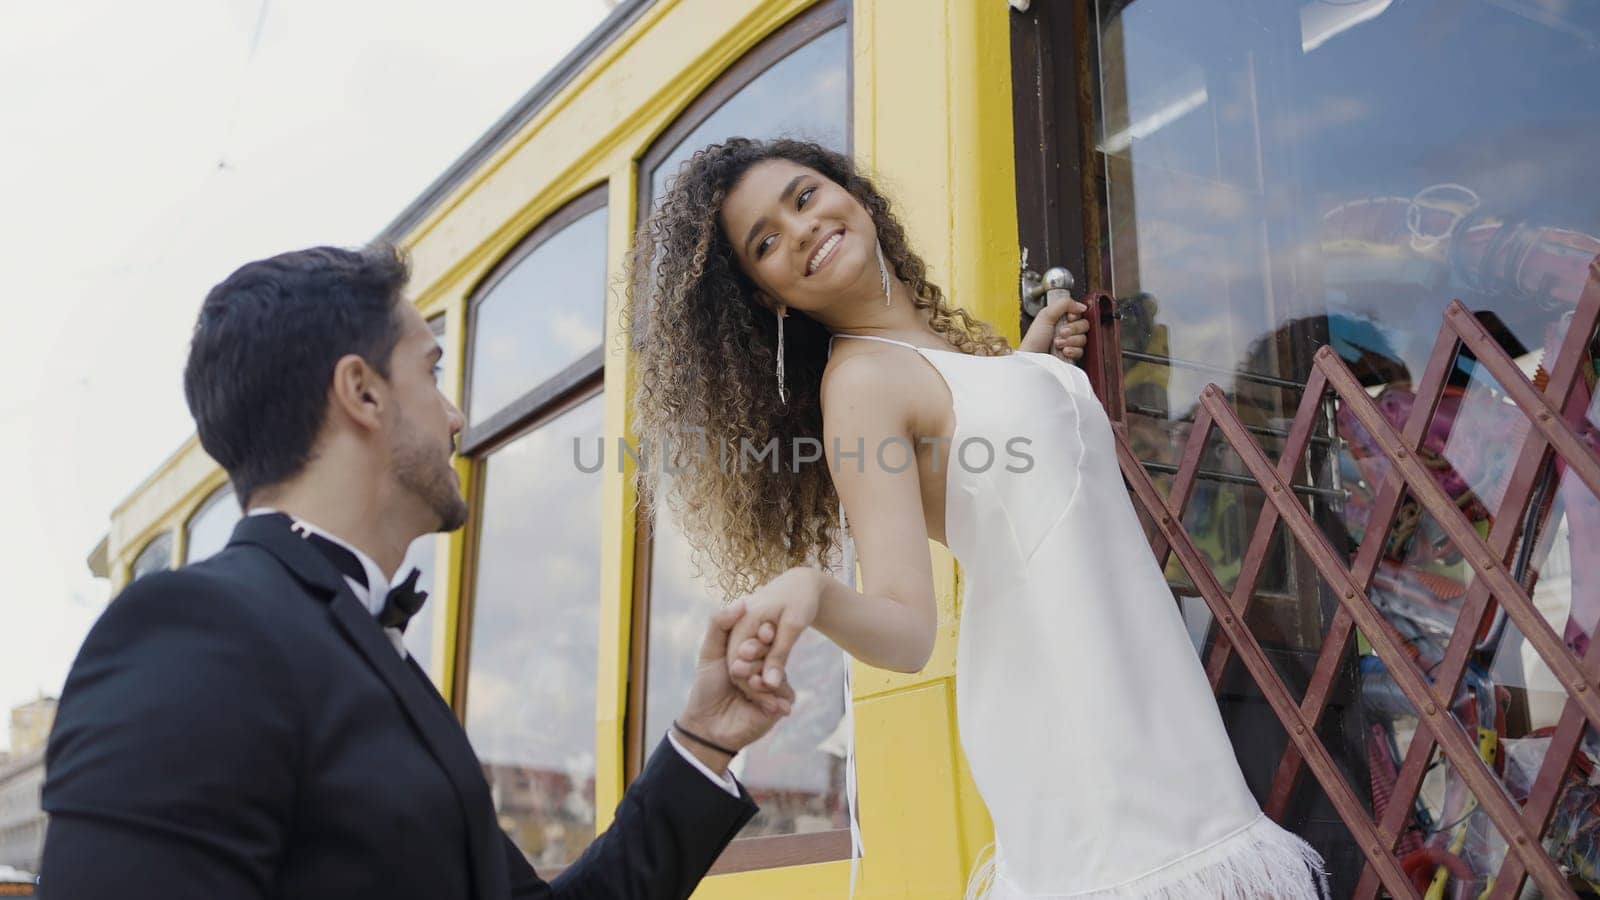 Romantic date outdoors in the city street. Action. Woman on the stairs of the tram car with her hand in a hand of a man in black suit. by Mediawhalestock